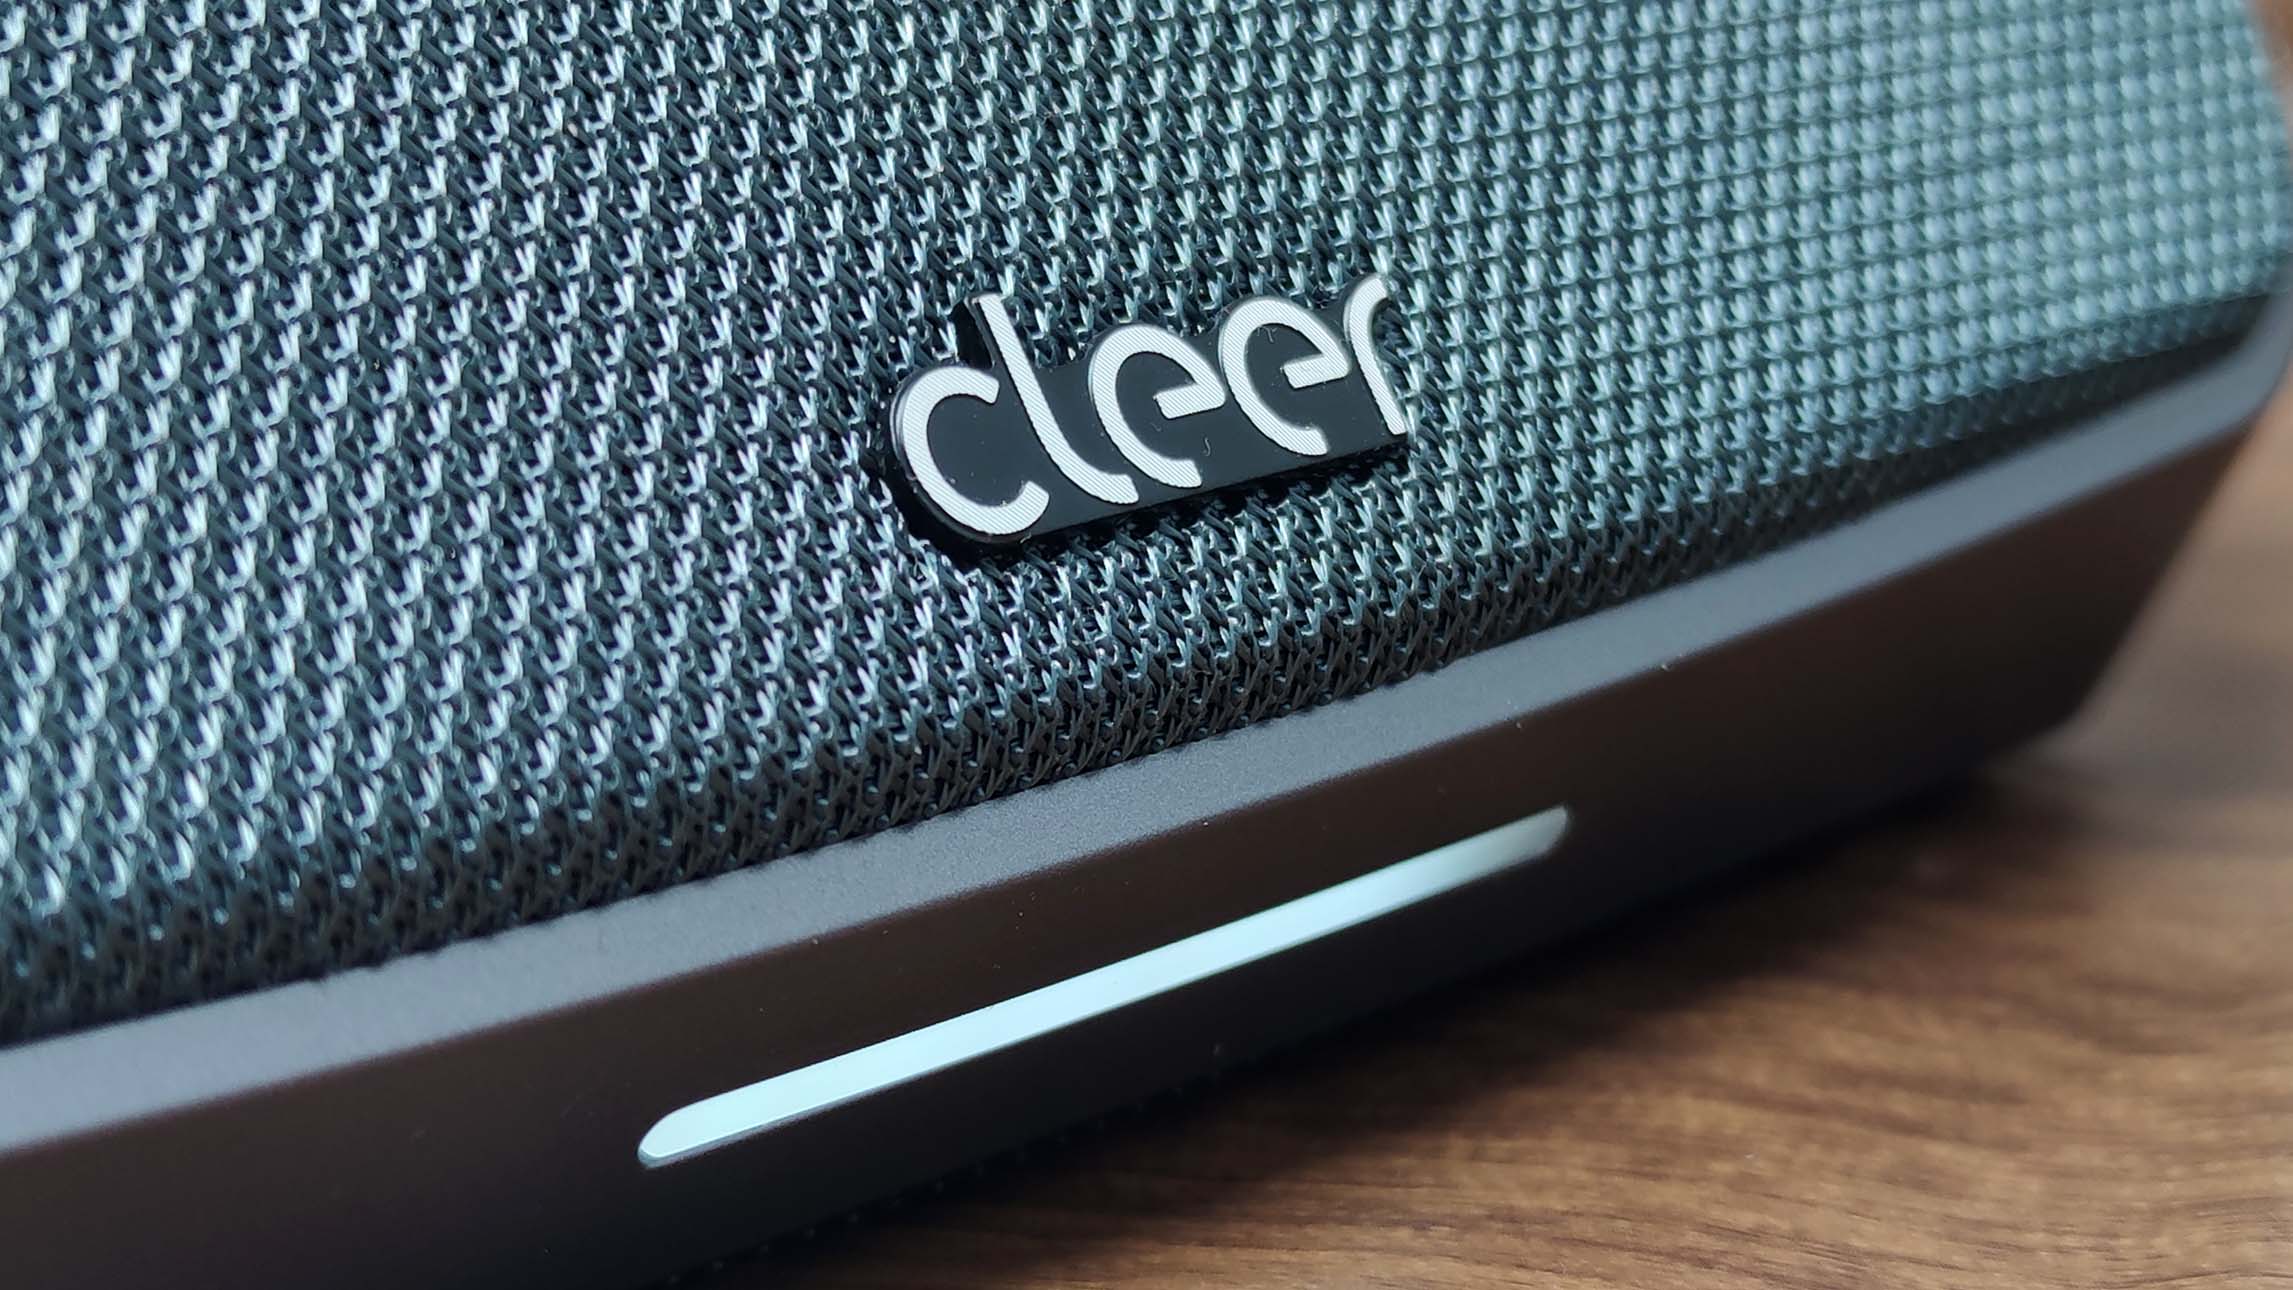 Cleer Audio Scene on wooden table, showing the logo and light on the front